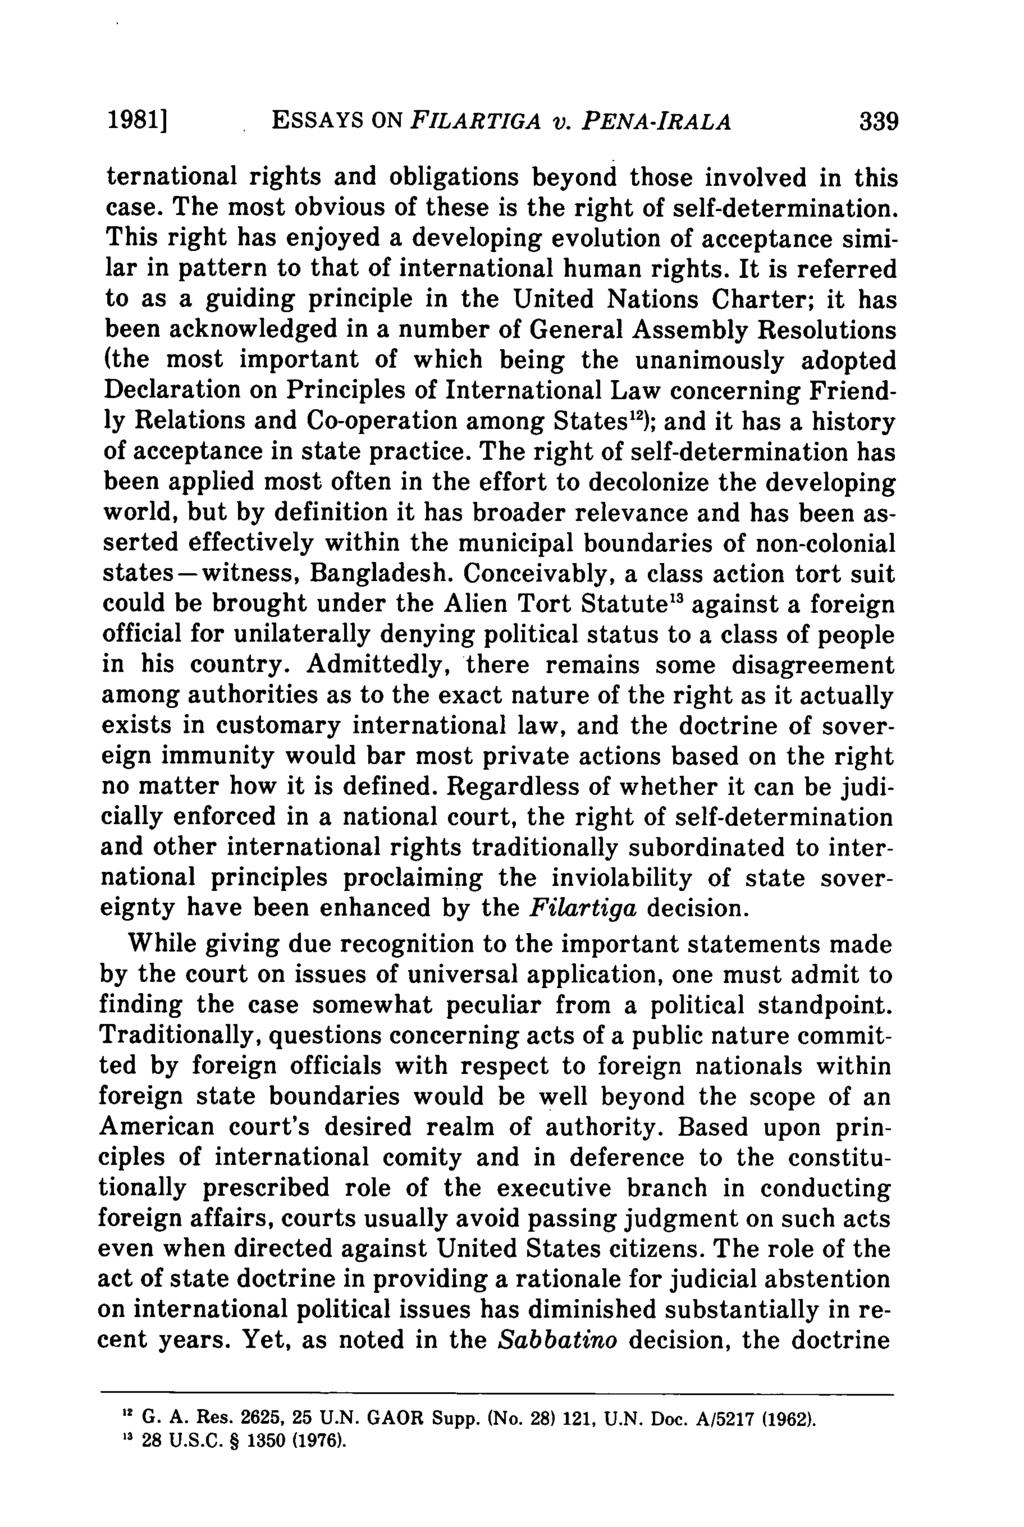 19811 ESSAYS ON FILARTIGA v. PENA-IRALA ternational rights and obligations beyond those involved in this case. The most obvious of these is the right of self-determination.